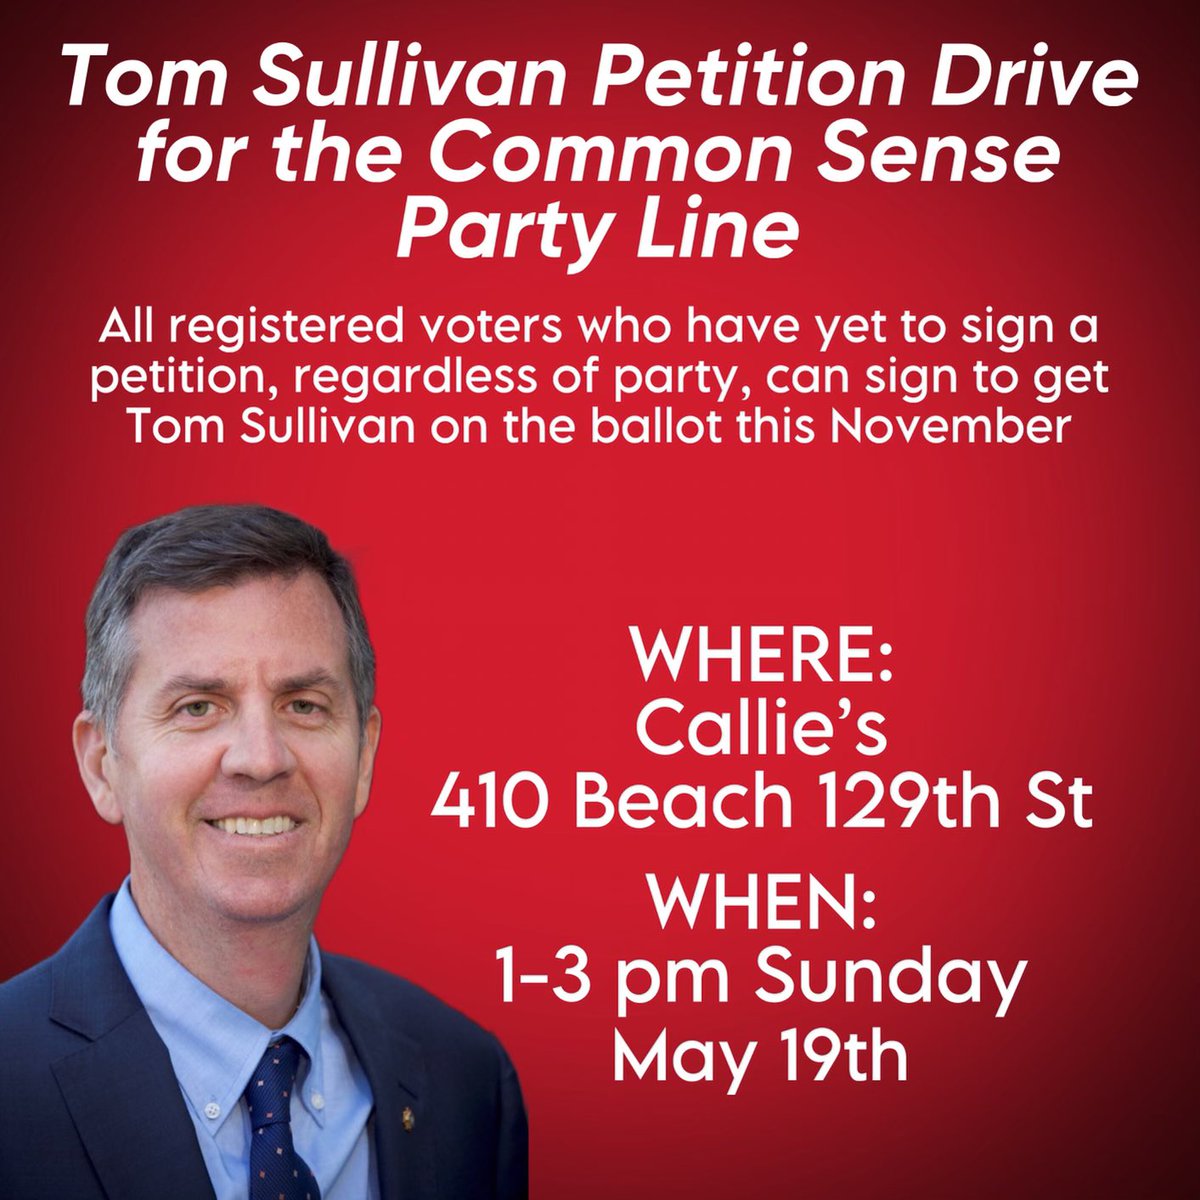 Please join us to get Tom Sullivan on the Common Sense Line this November